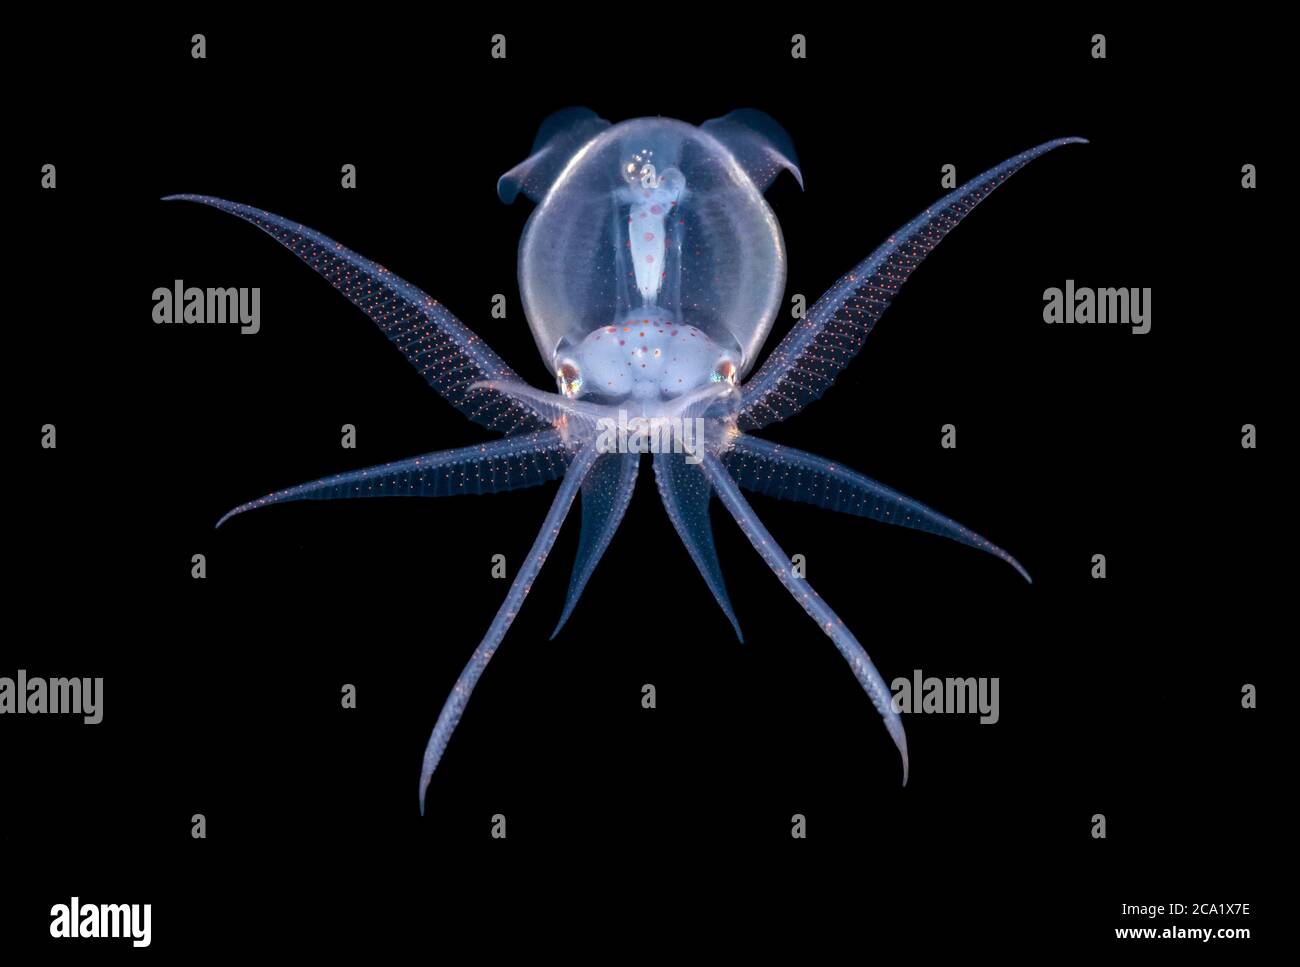 juvenile deep water diamond squid, Thysanoteuthis rhombus, photographed during a black water drift dive near the surface in waters 600 feet deep, Palm Stock Photo